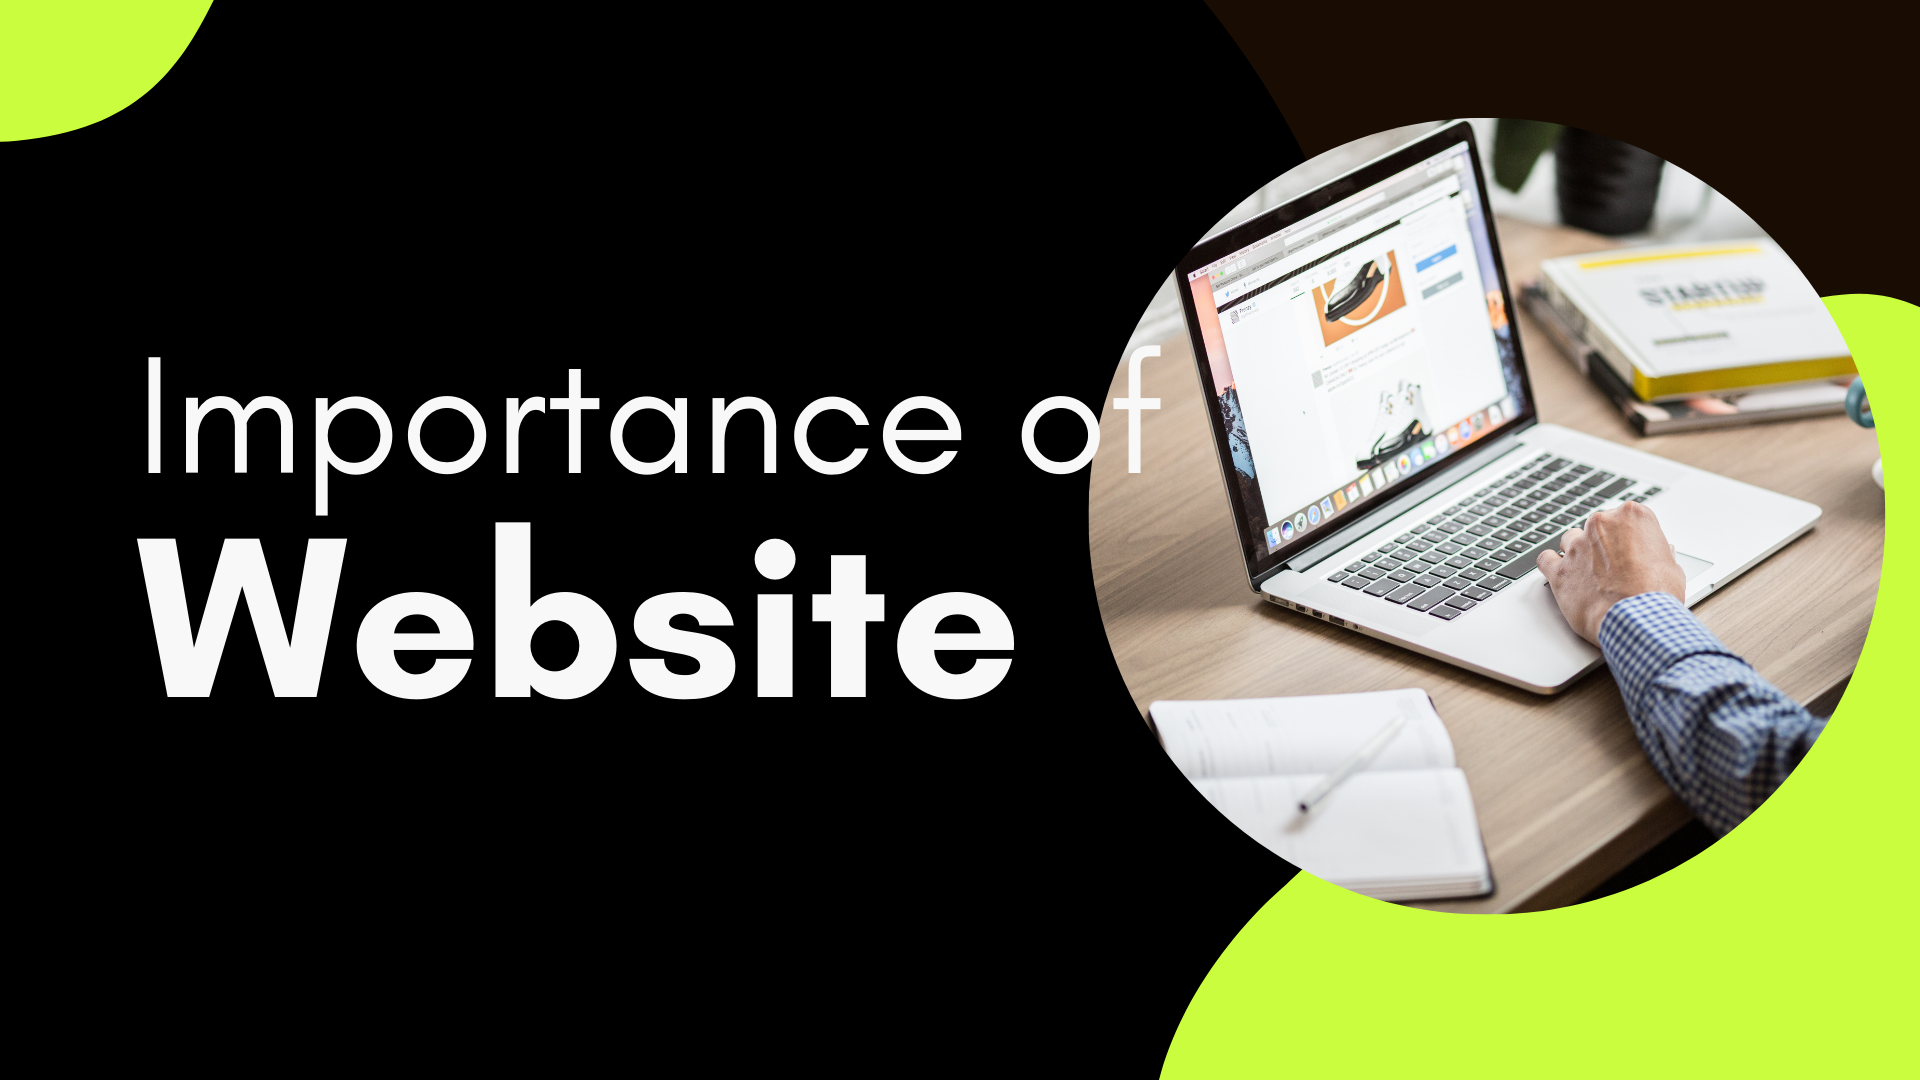 The Importance of Having a Website in Todays Digital Landscape